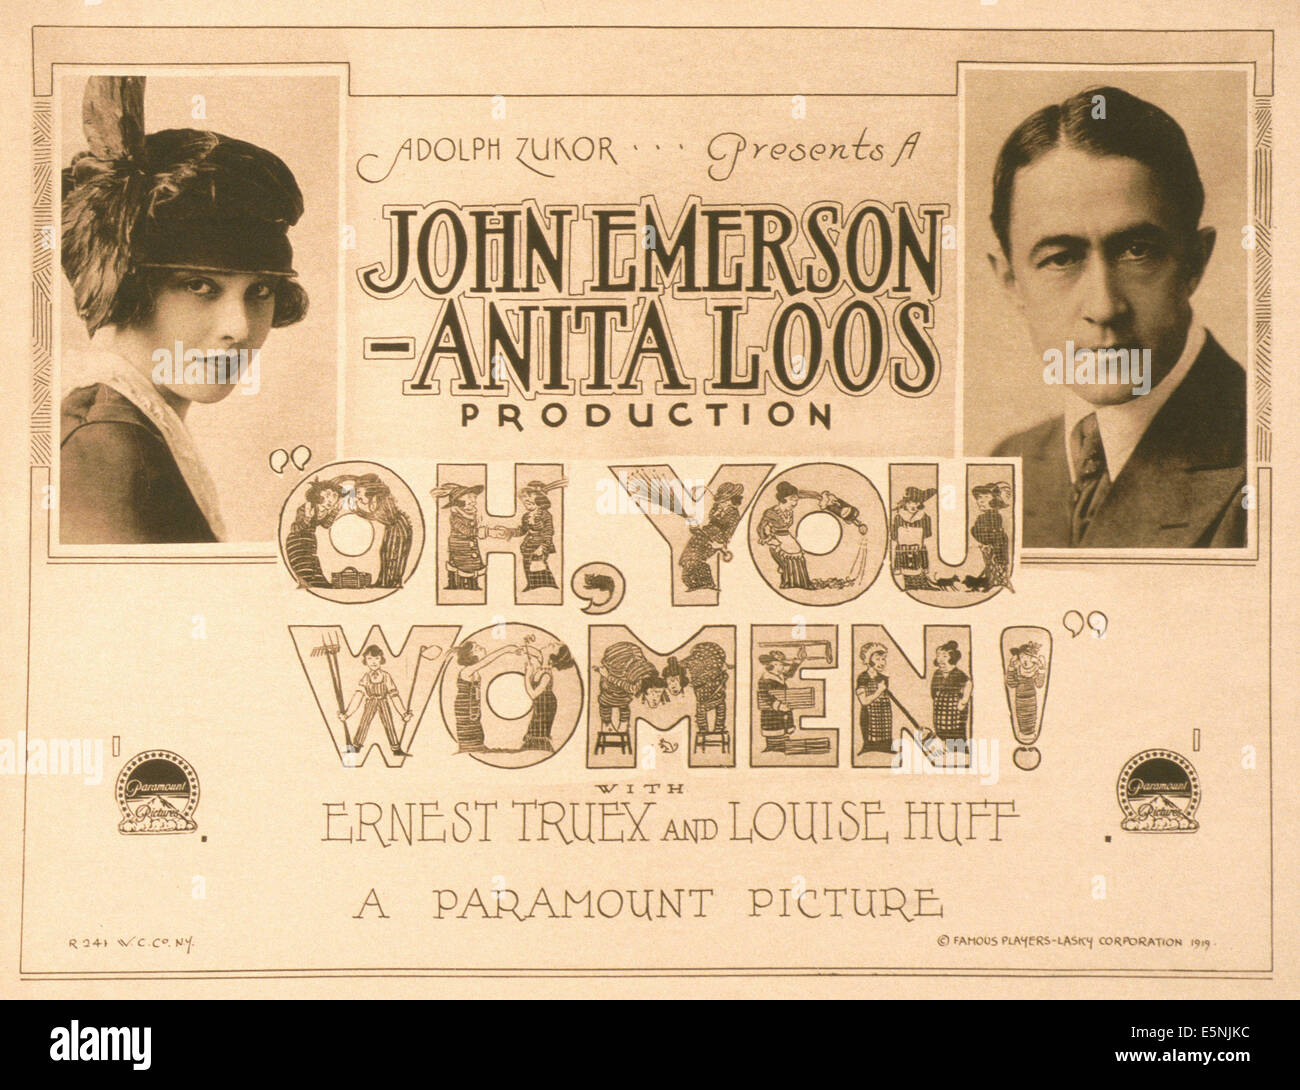 OH, YOU WOMEN, US poster, from left: Anita Loos, John Emerson, 1919 Stock Photo